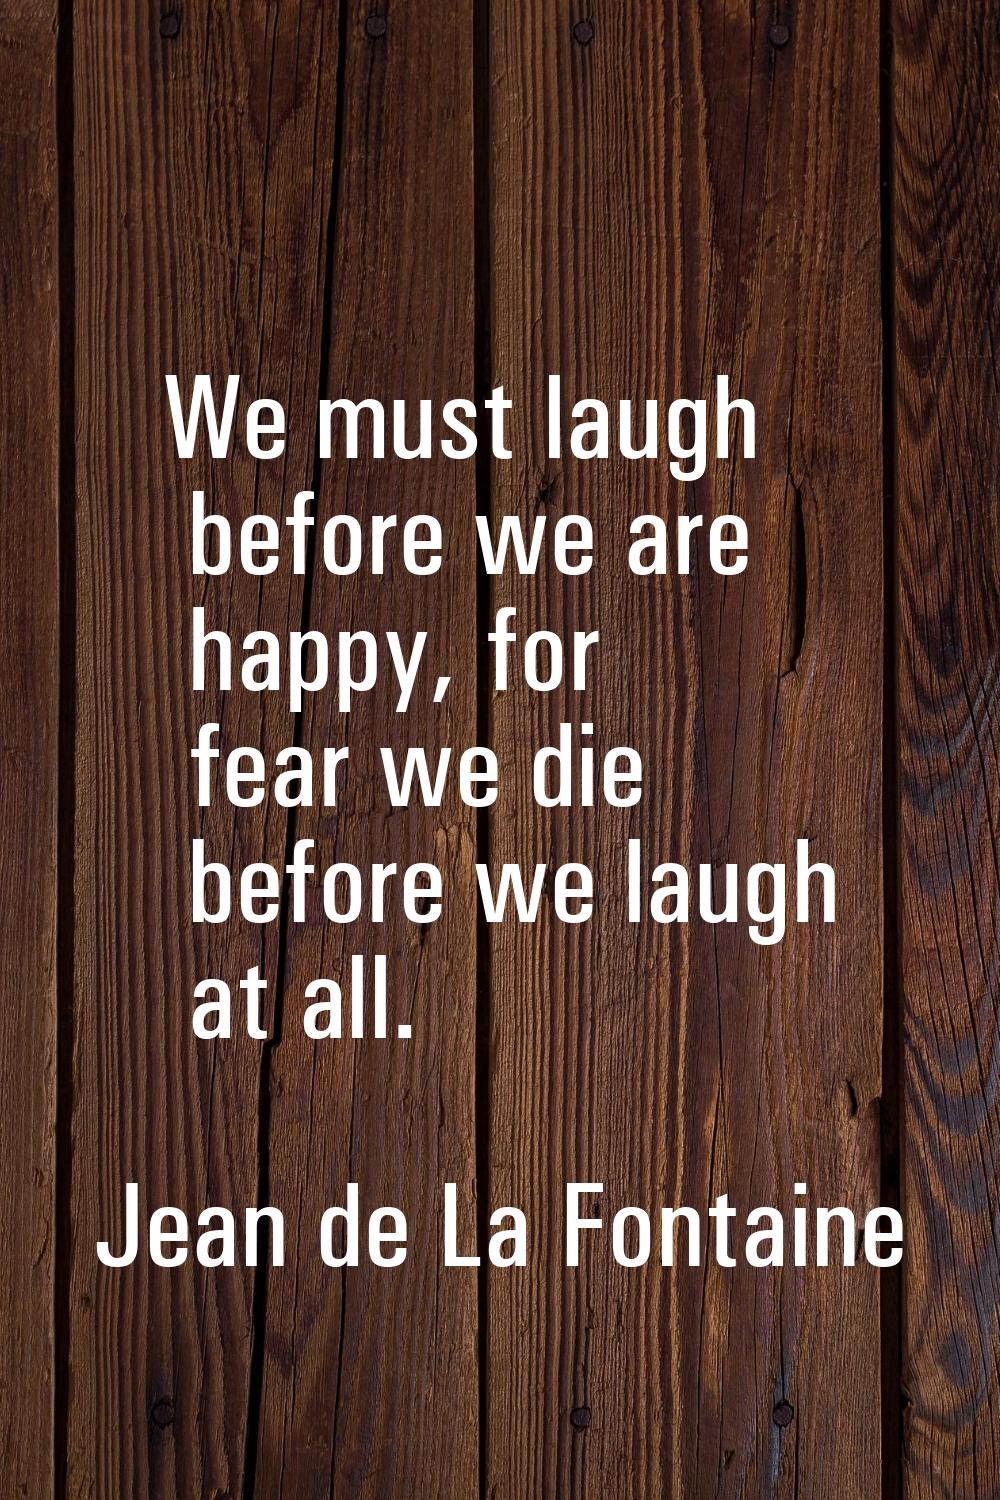 We must laugh before we are happy, for fear we die before we laugh at all.